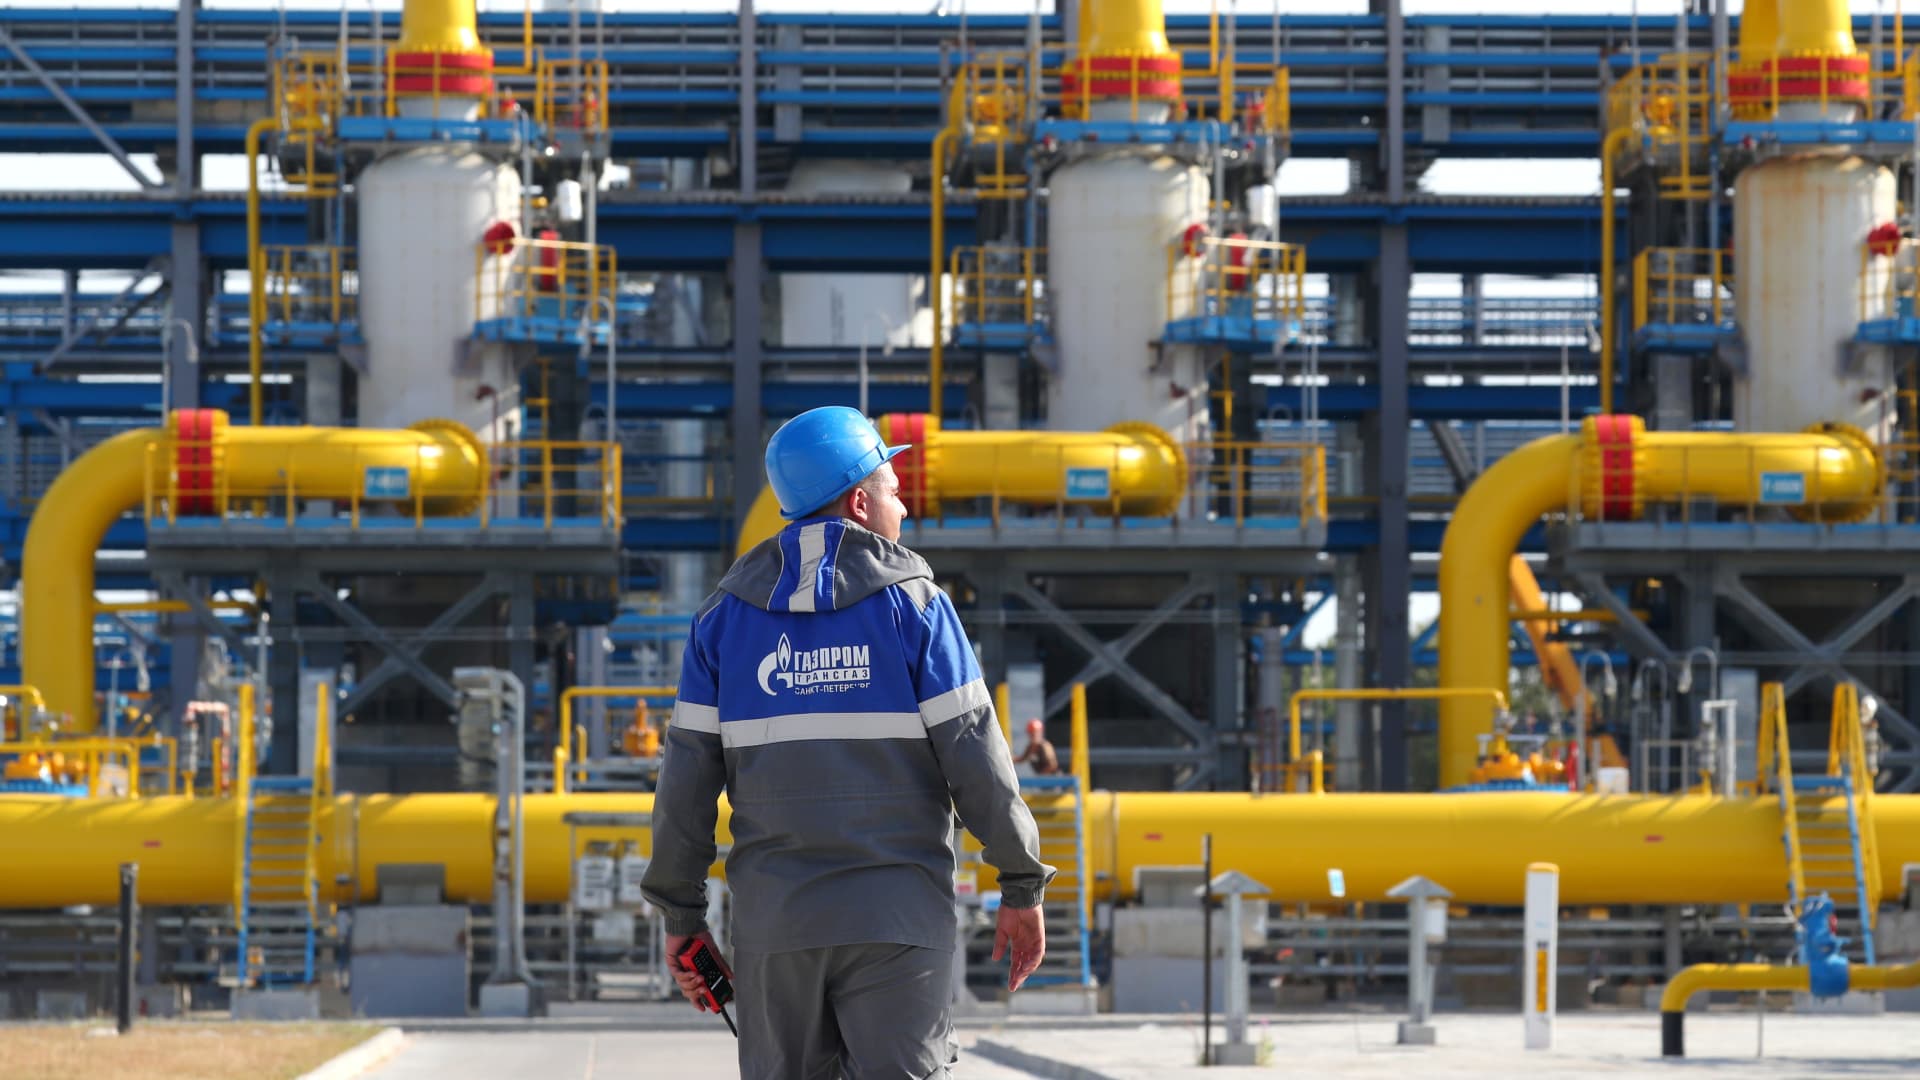 A facility near the starting point of the Nord Stream 2 offshore natural gas pipeline.